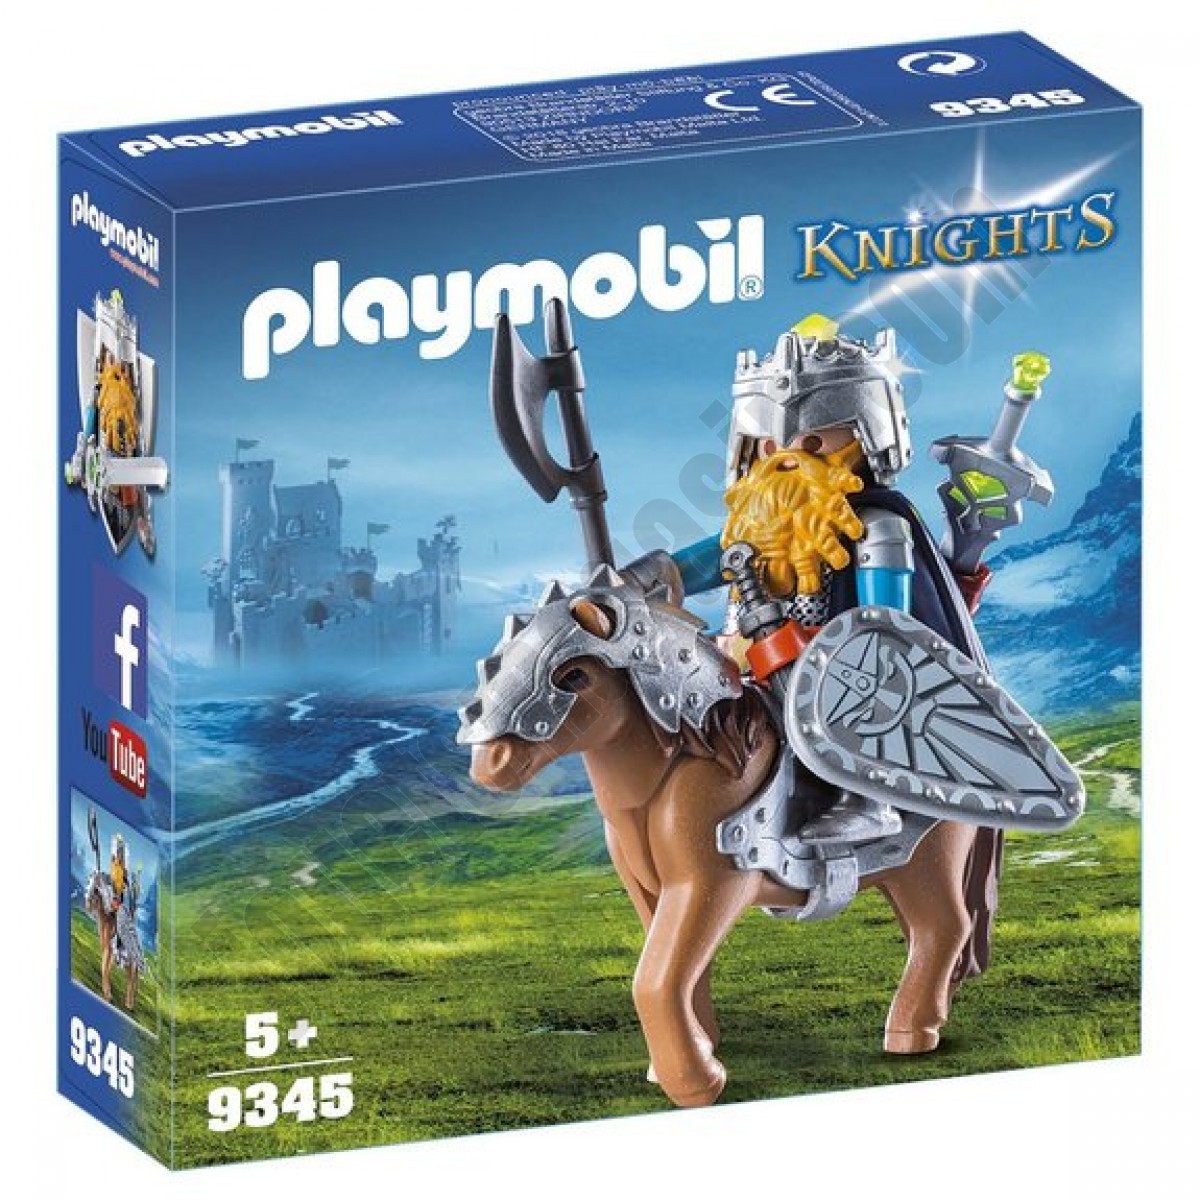 Combattant nain et poney Playmobil Knights 9345 ◆◆◆ Nouveau - Combattant nain et poney Playmobil Knights 9345 ◆◆◆ Nouveau